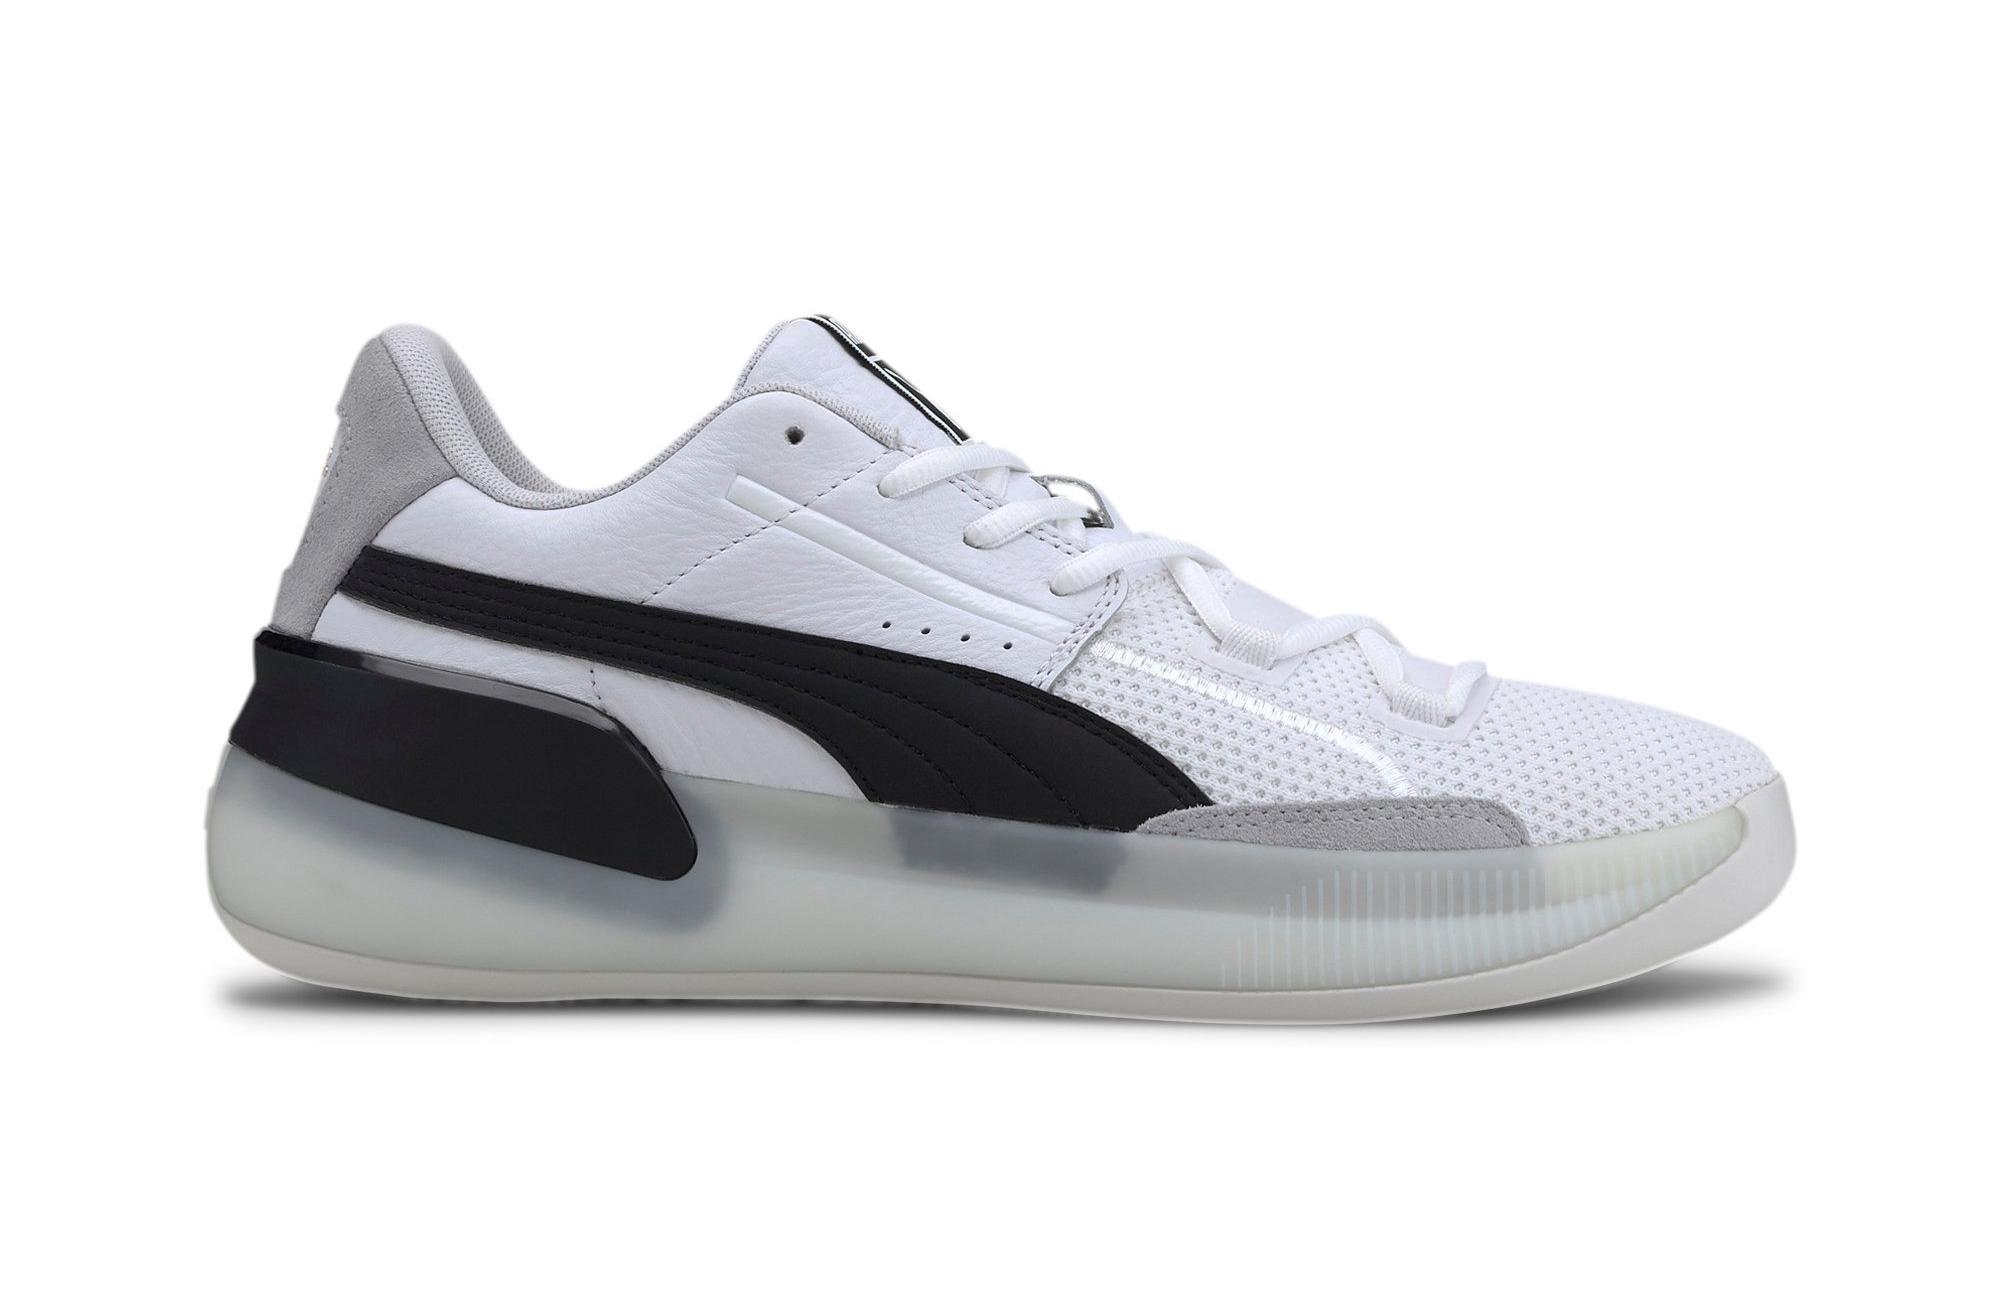 Sneakers Release: Men’s Puma Clyde Court Hardwood Basketball Shoes ...